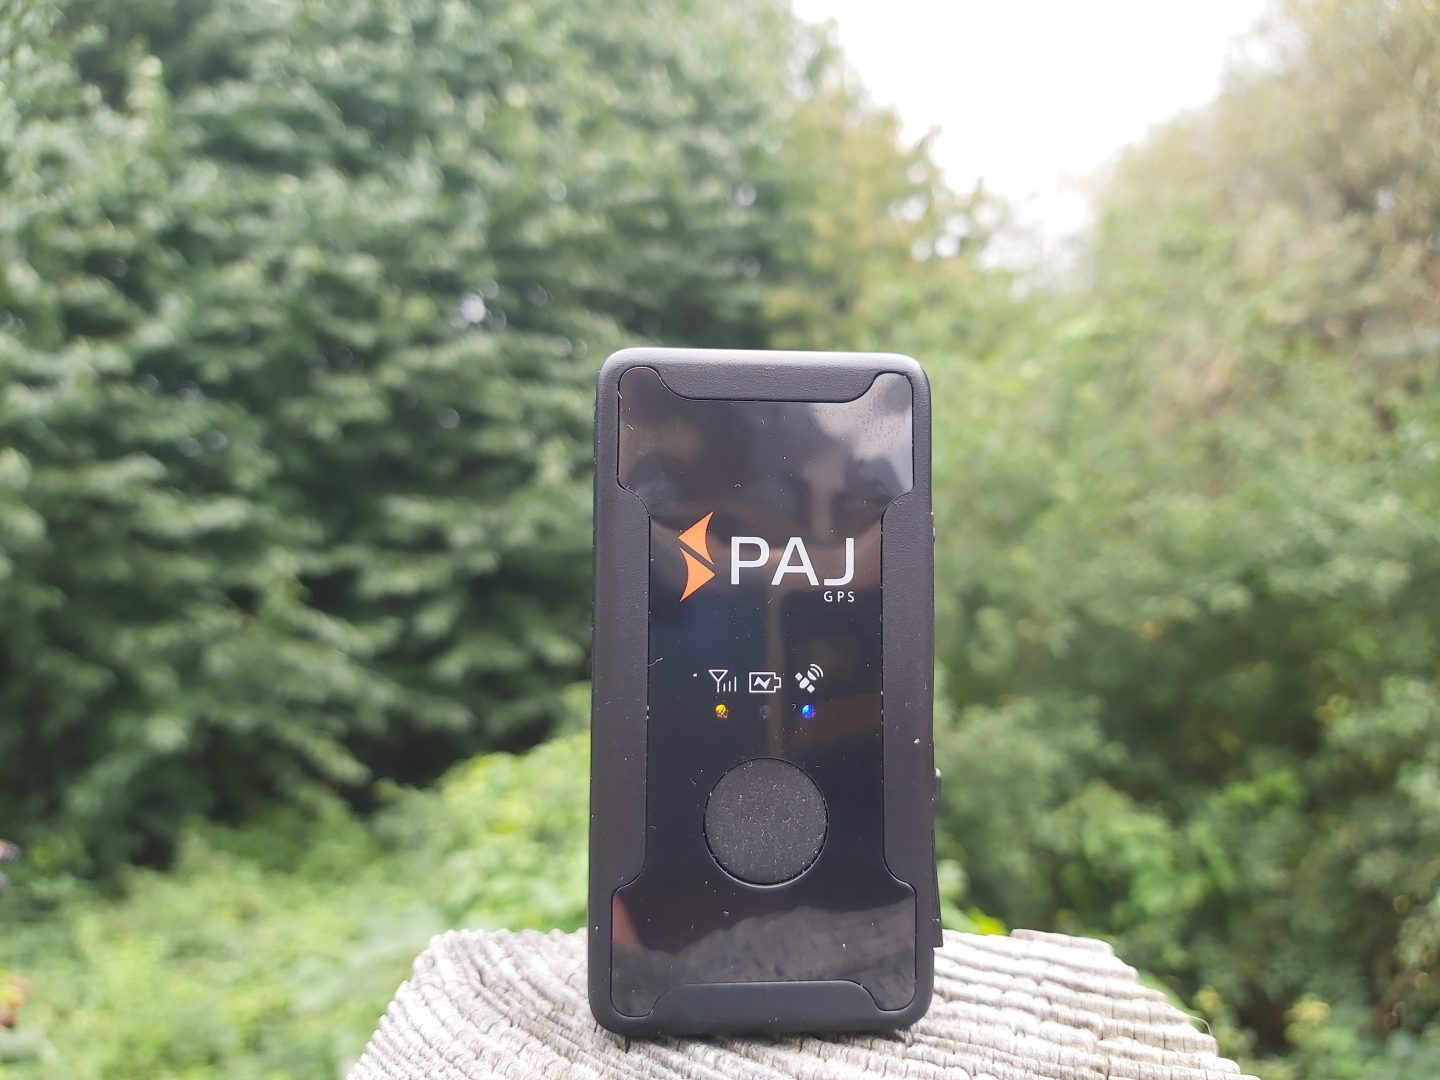 PAJ Easy Finder GPS Tracker displayed on top of a wooden post with trees in the background